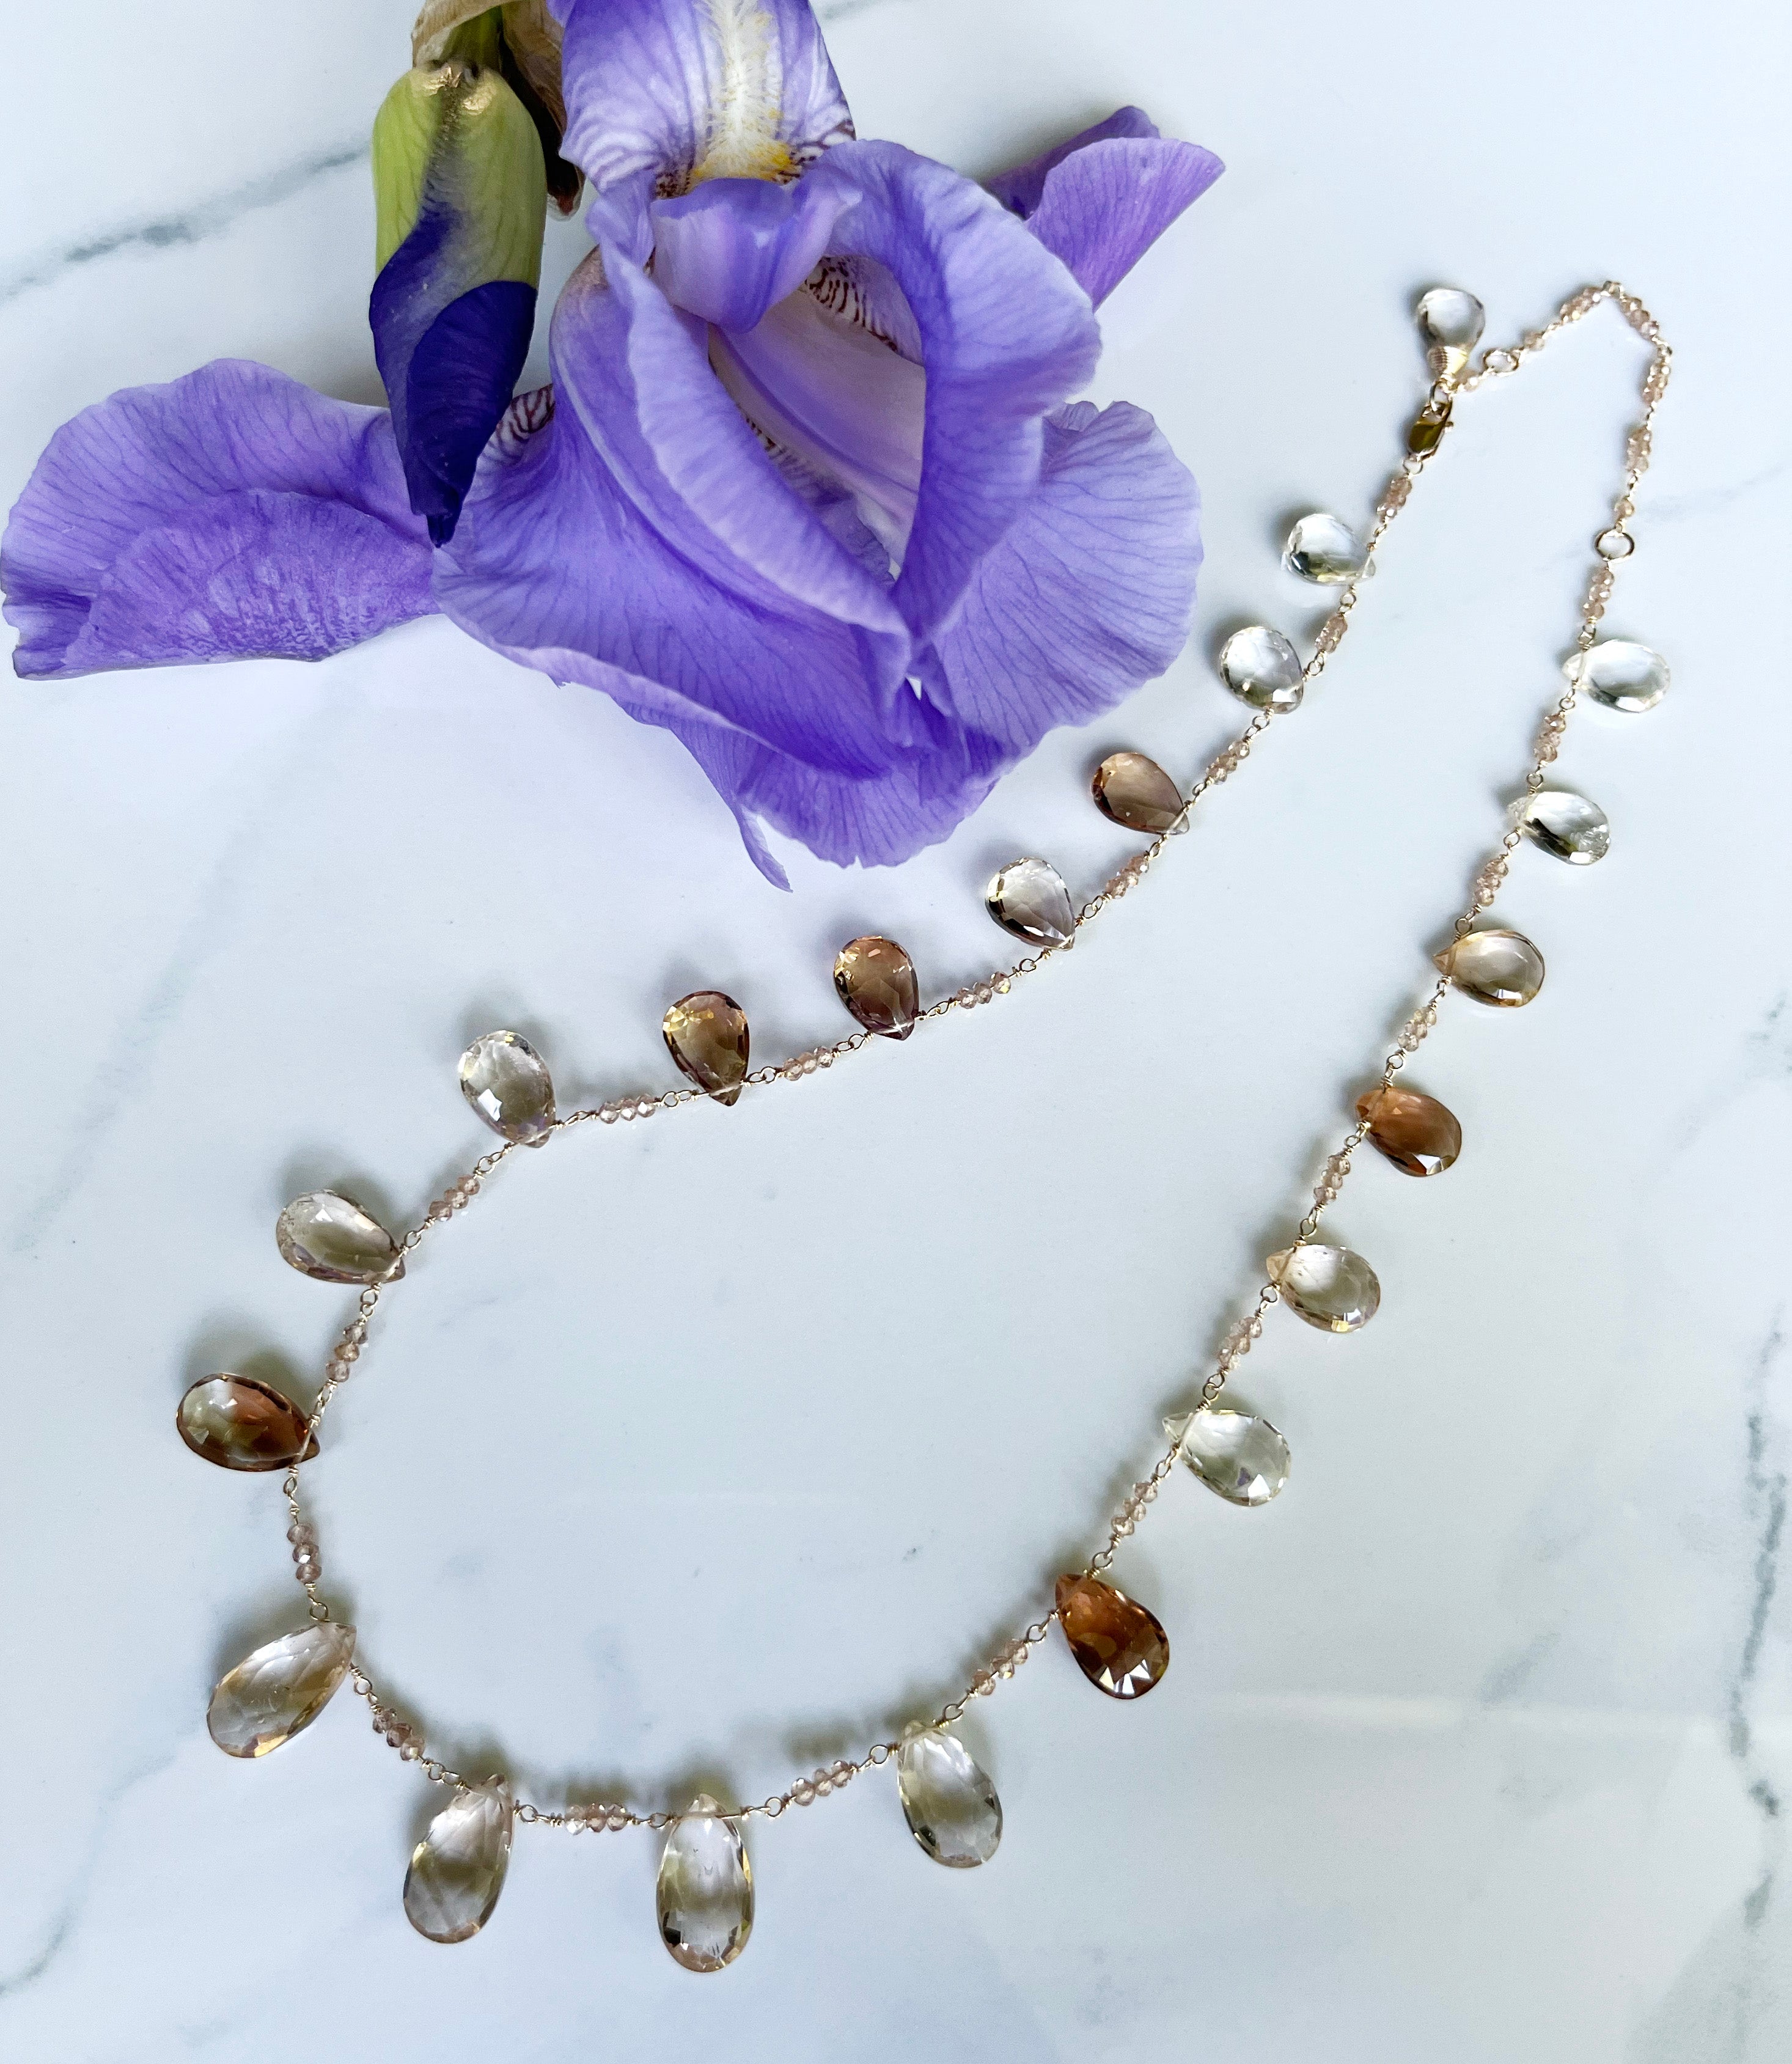 Imperial Topaz necklace